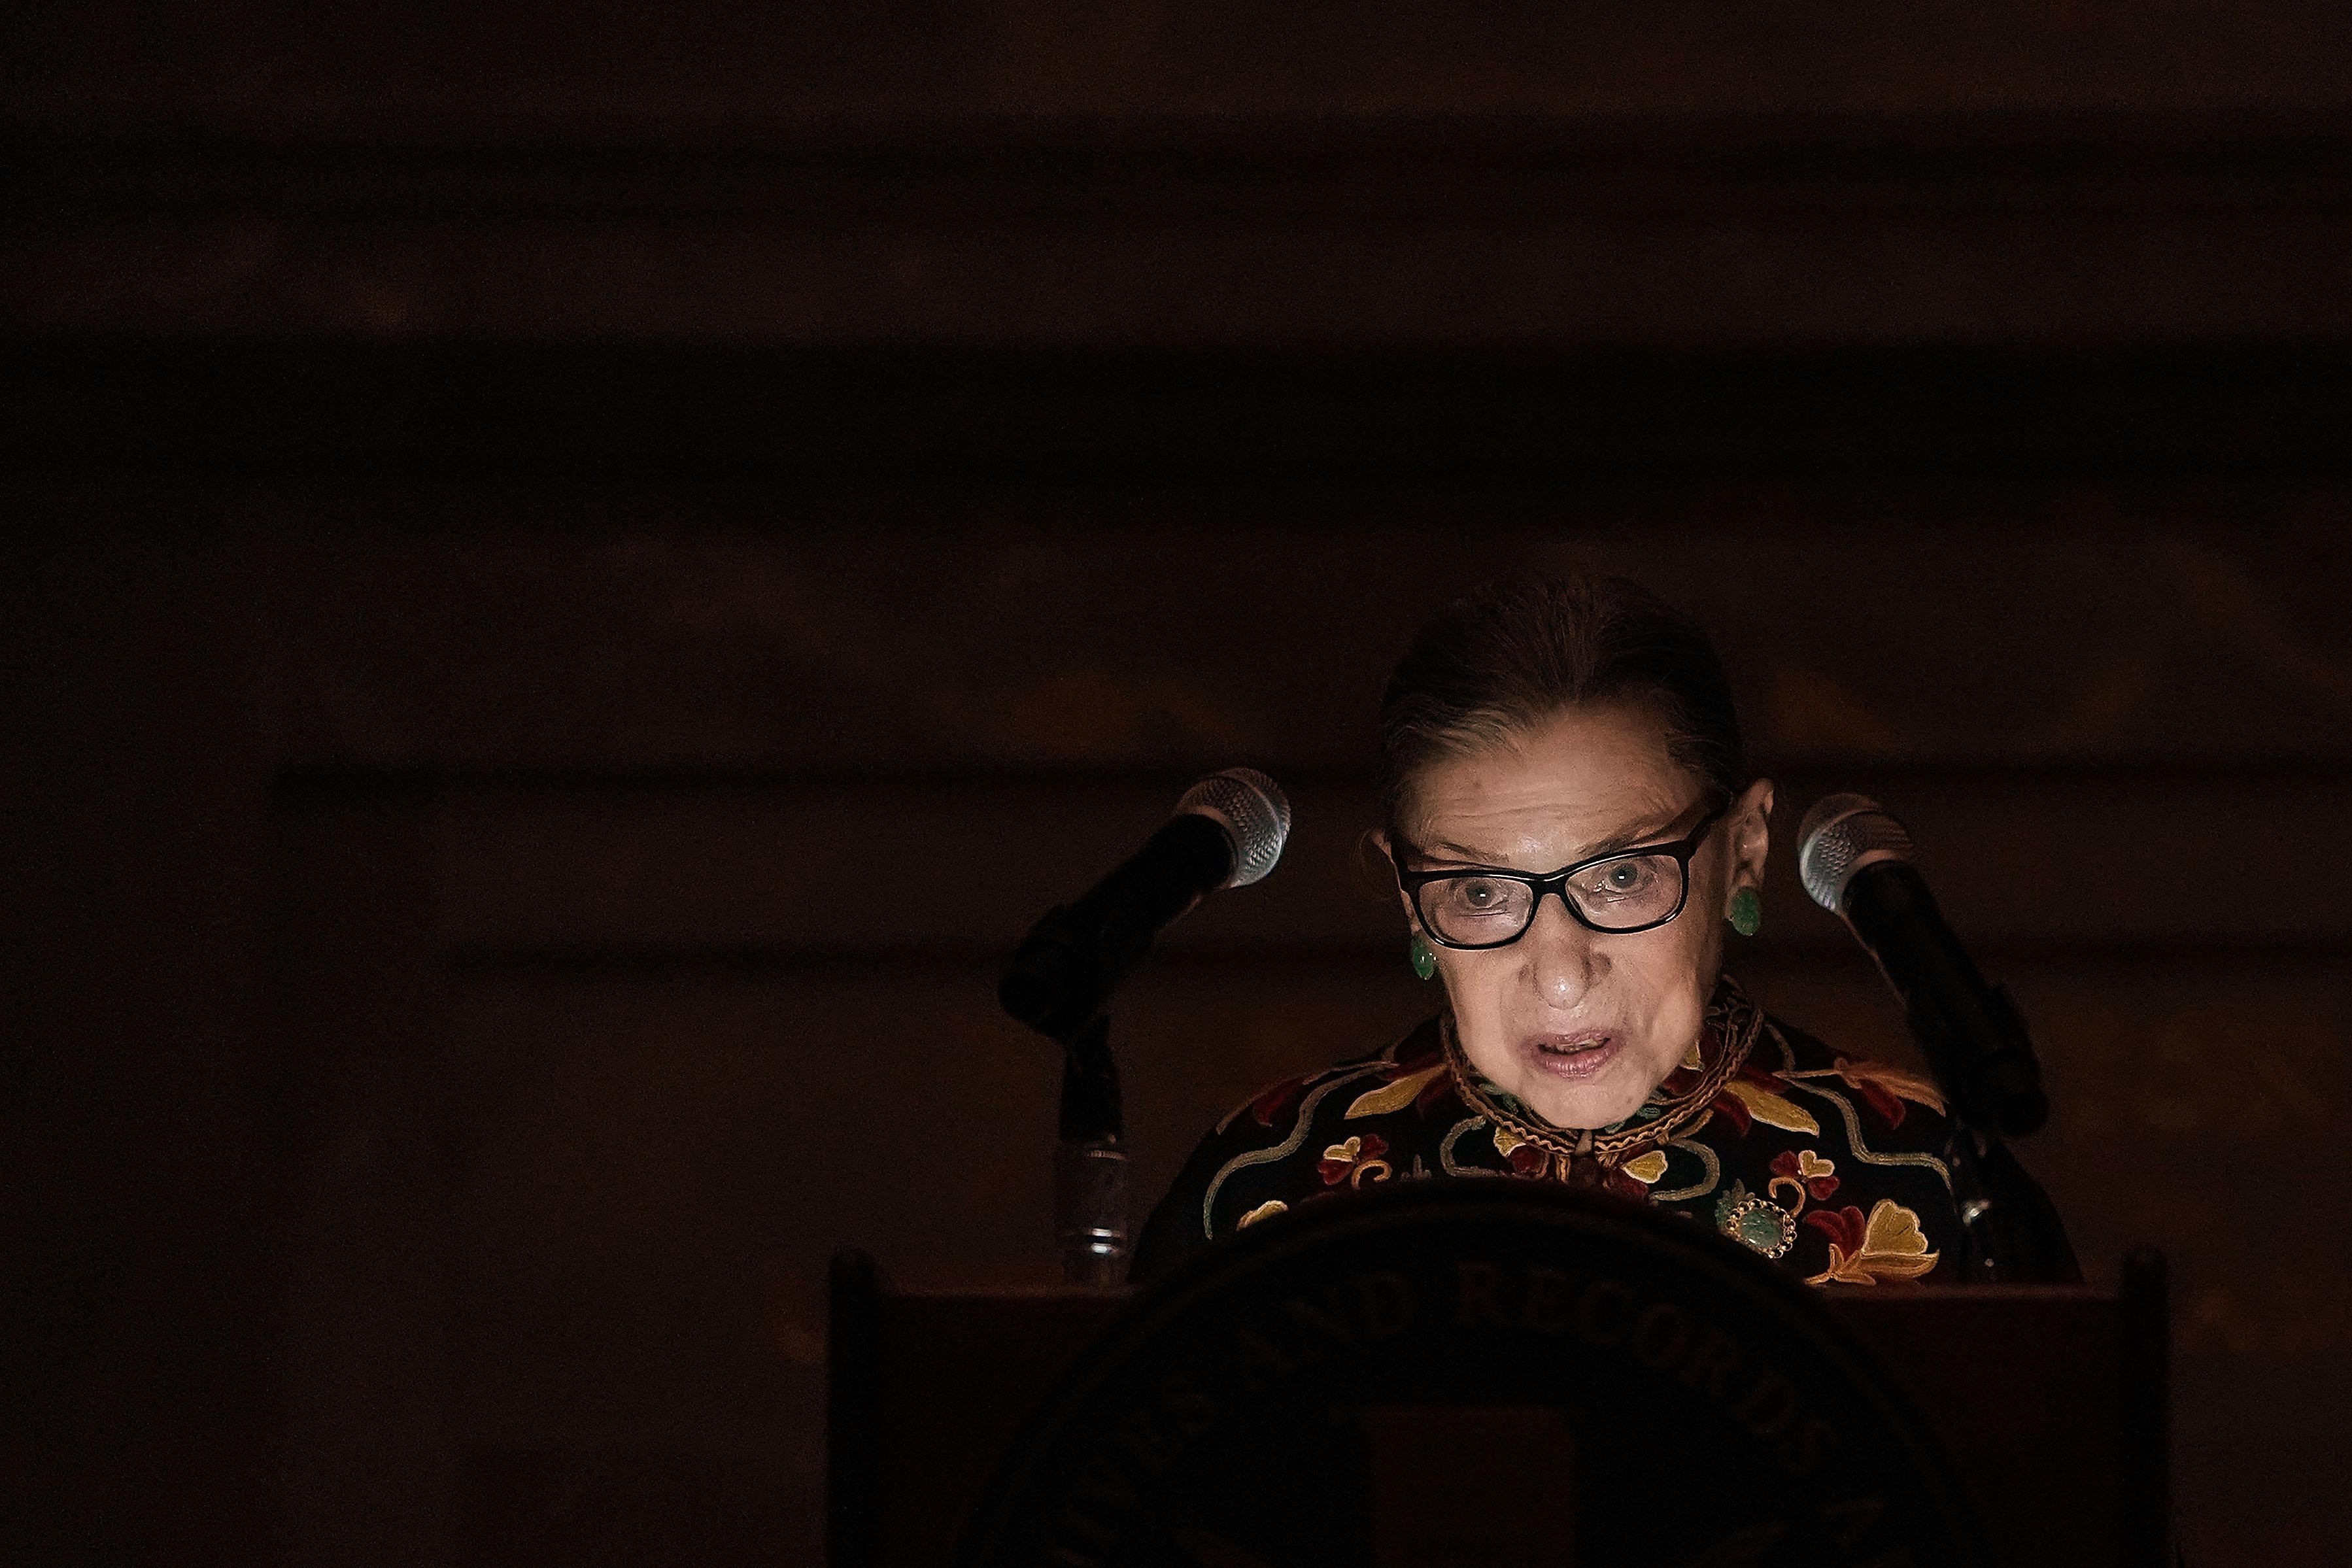 Supreme Court Justice Ruth Bader Ginsburg speaks during a naturalization ceremony at the Rotunda of the National Archives December 14, 2018 in Washington, D.C.